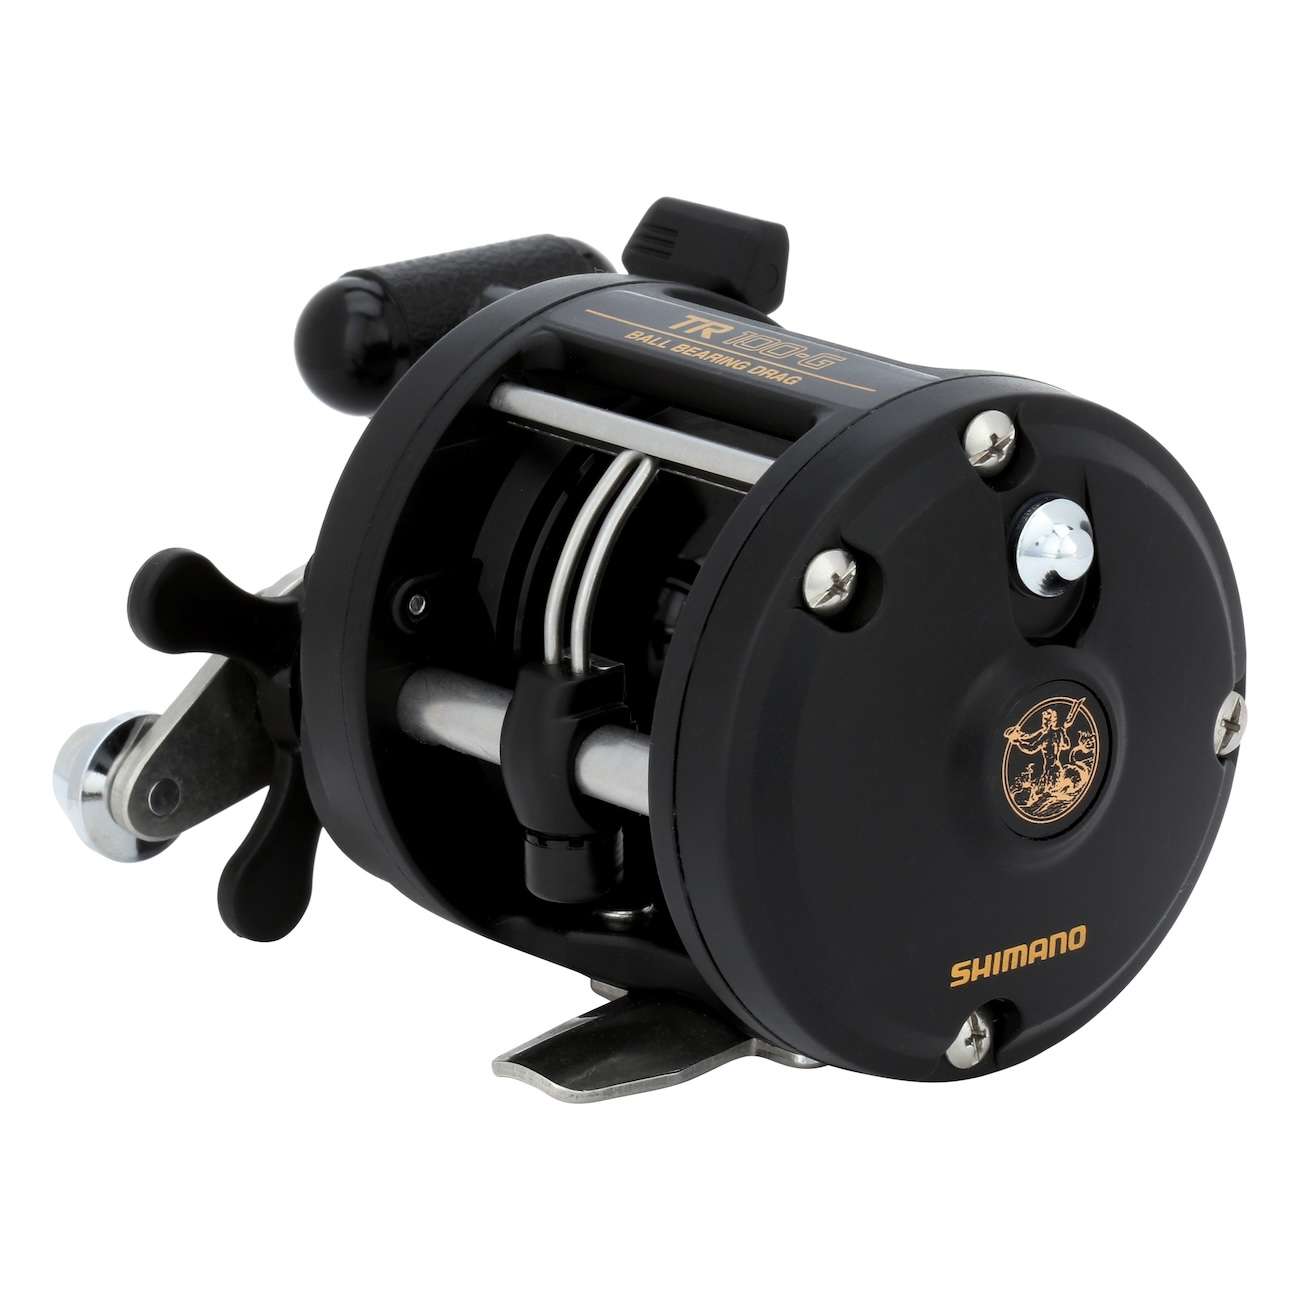 Shimano Triton 100GT… anyone know what the difference is with the